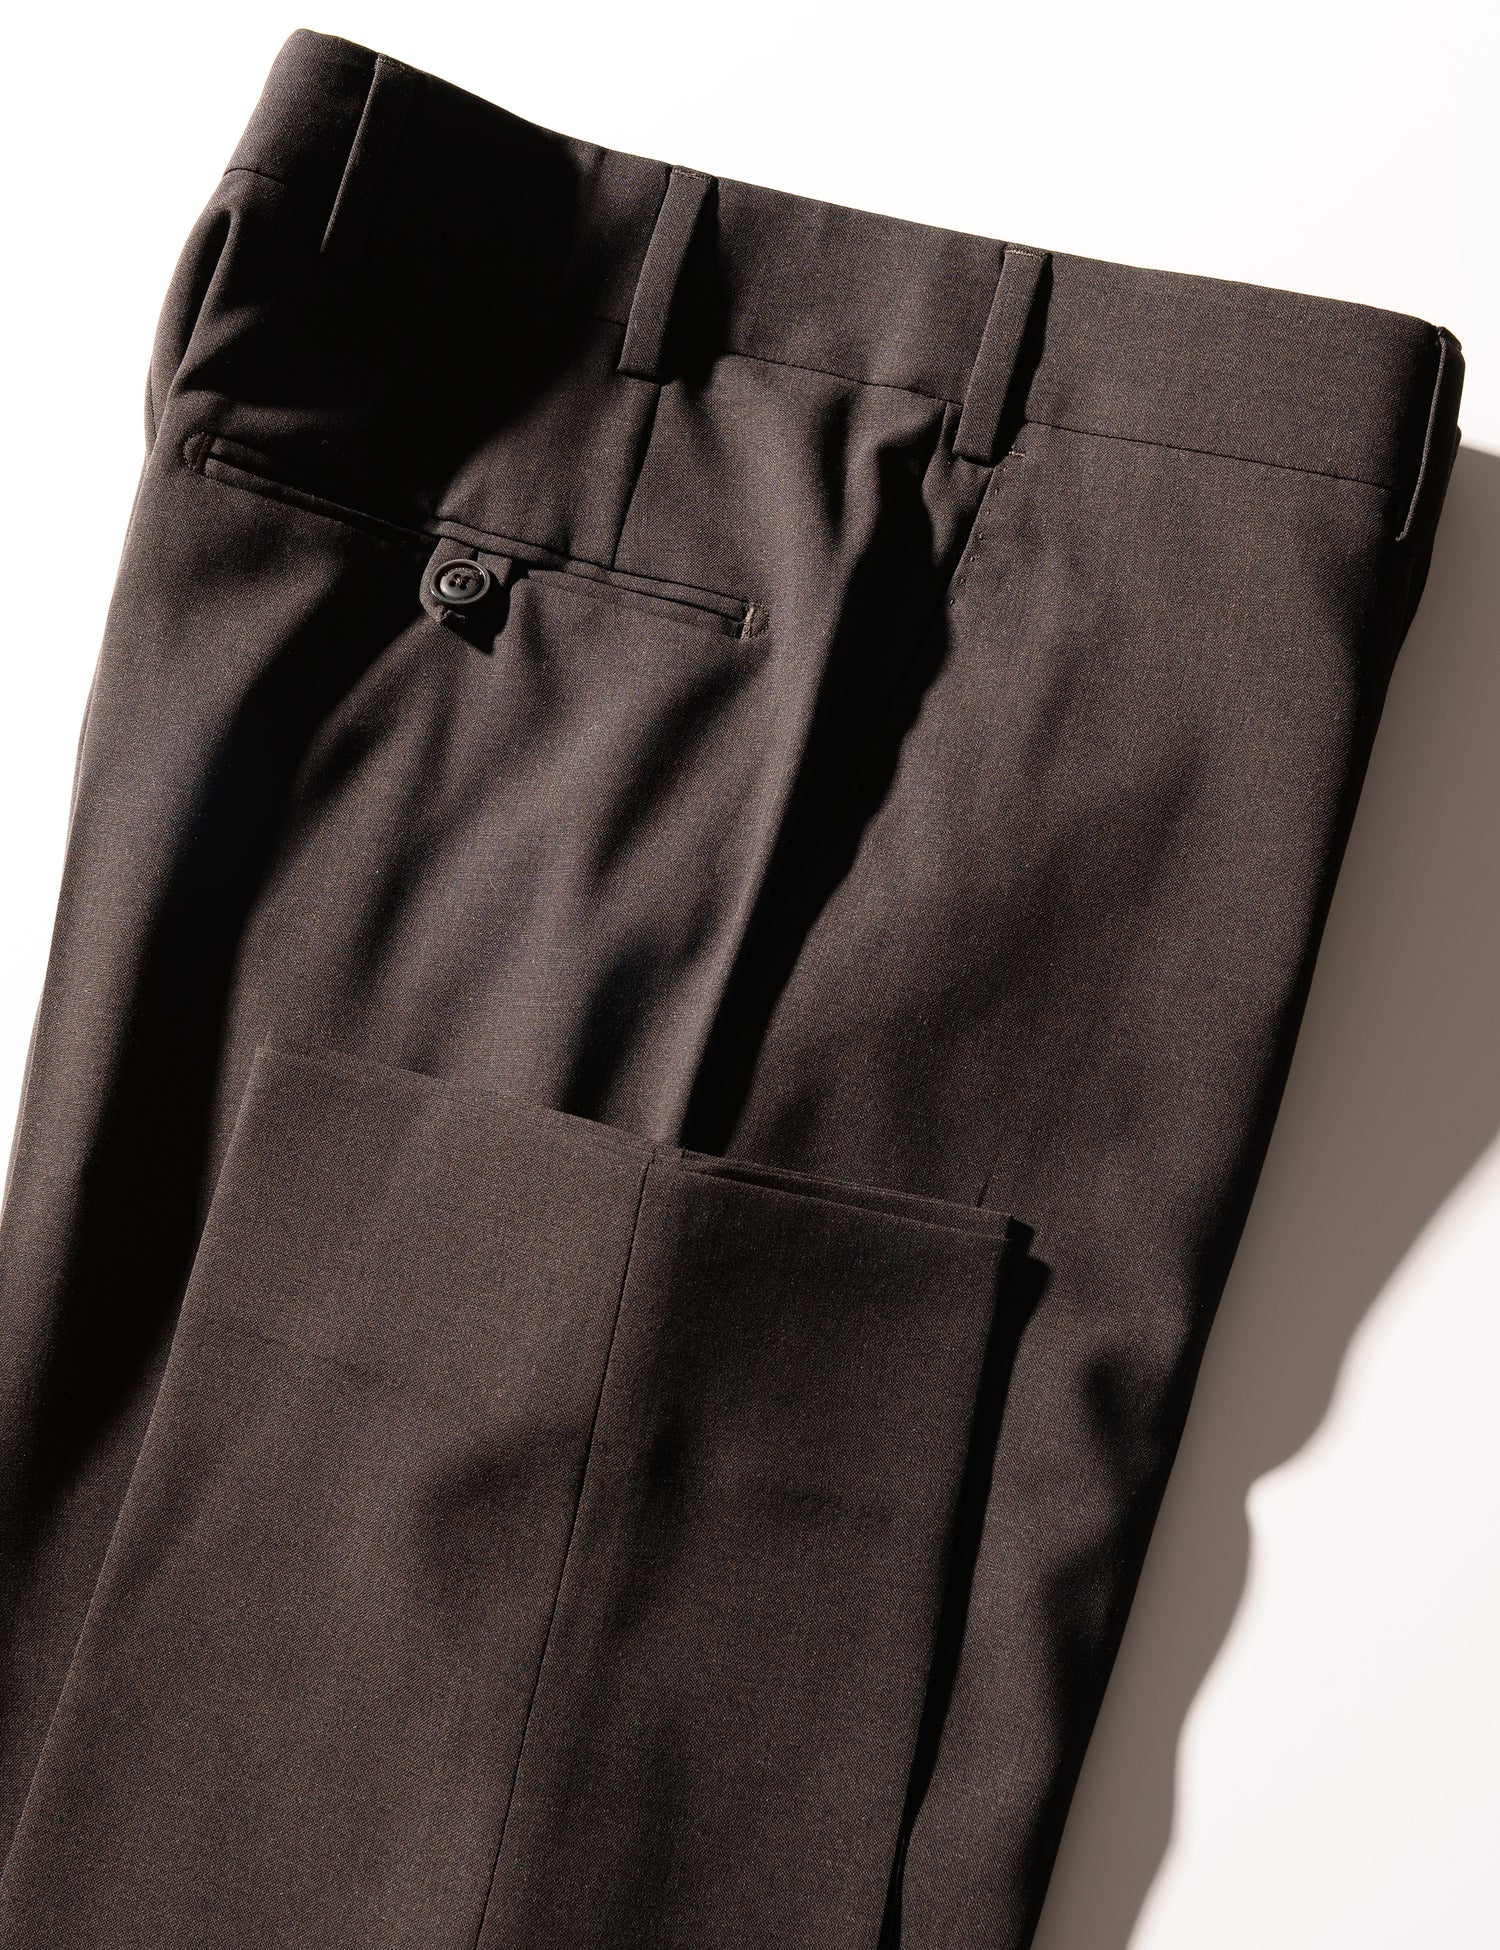 Detail shot of Brooklyn Tailors BKT50 Tailored Trousers in Heathered Plainweave - Charred Ember showing hem and back pocket